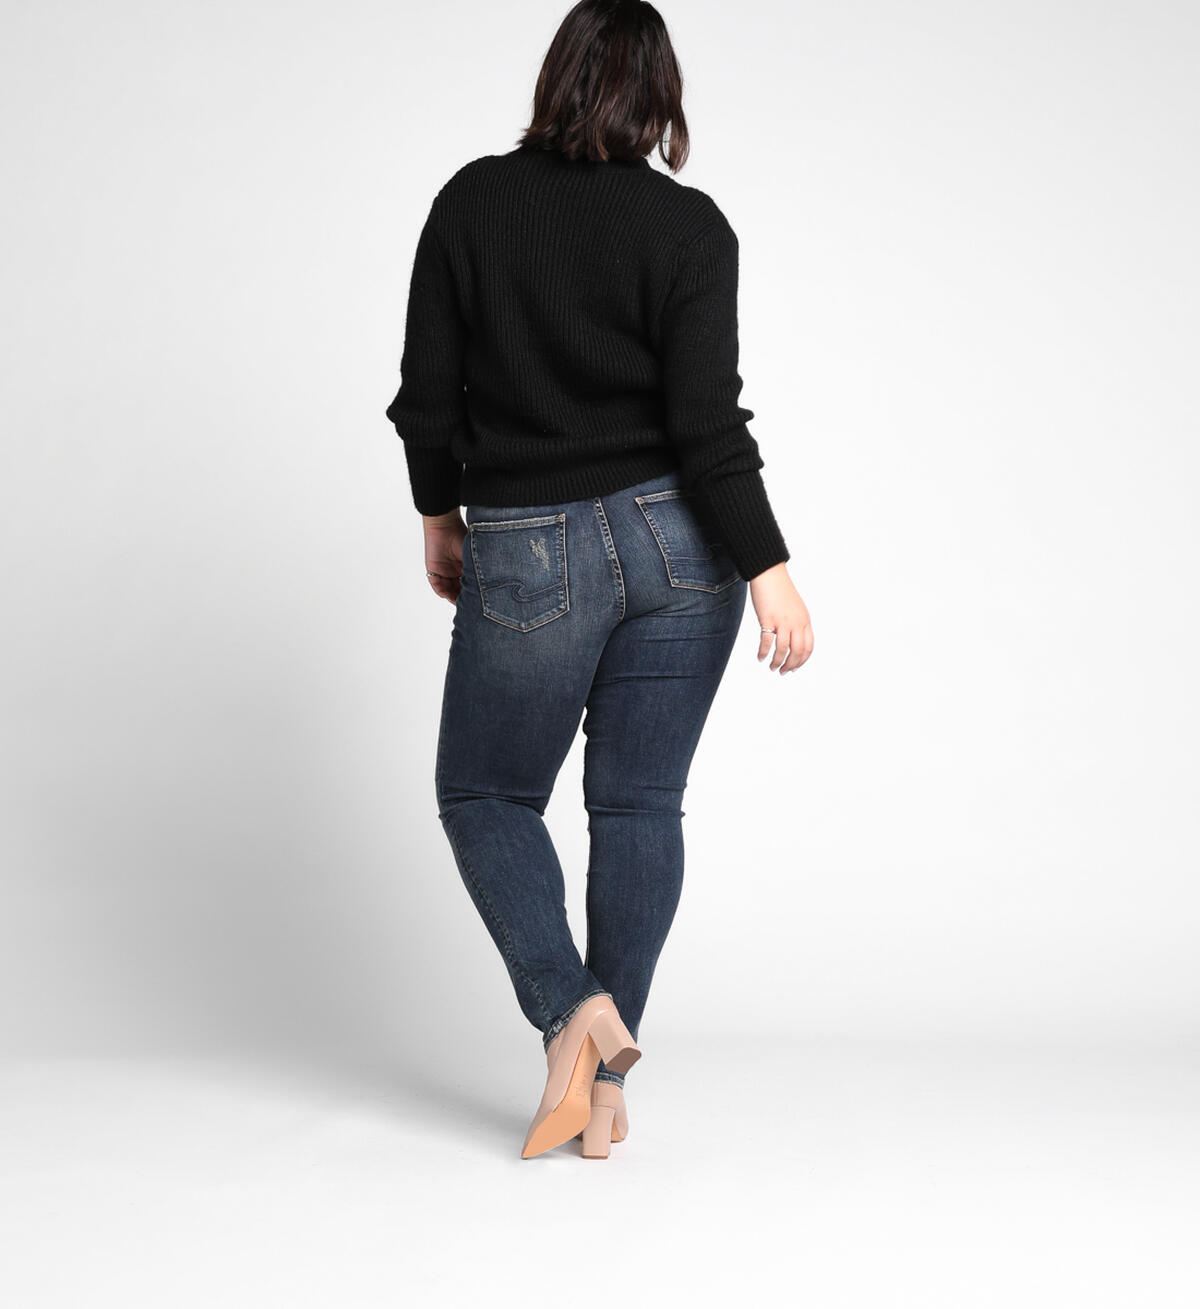 Avery High Rise Slim Leg Jeans Plus Size Final Sale, , hi-res image number 1